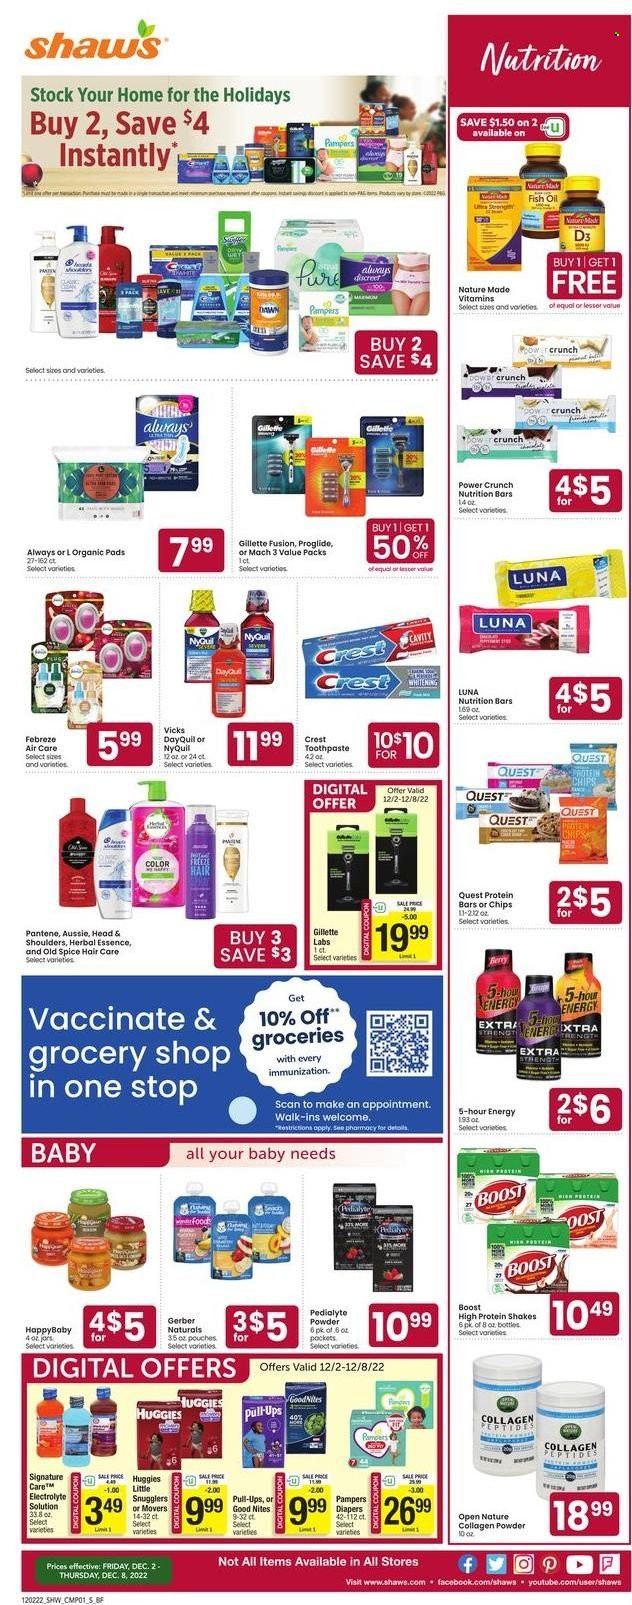 thumbnail - Shaw’s Flyer - 12/02/2022 - 12/08/2022 - Sales products - protein drink, shake, Gerber, chips, nutrition bar, protein bar, spice, oil, Boost, gin, Febreze, Old Spice, toothpaste, Crest, Always Discreet, Aussie, Head & Shoulders, Pantene, Gillette, DayQuil, fish oil, Nature Made, NyQuil, Vicks, vitamin D3. Page 5.